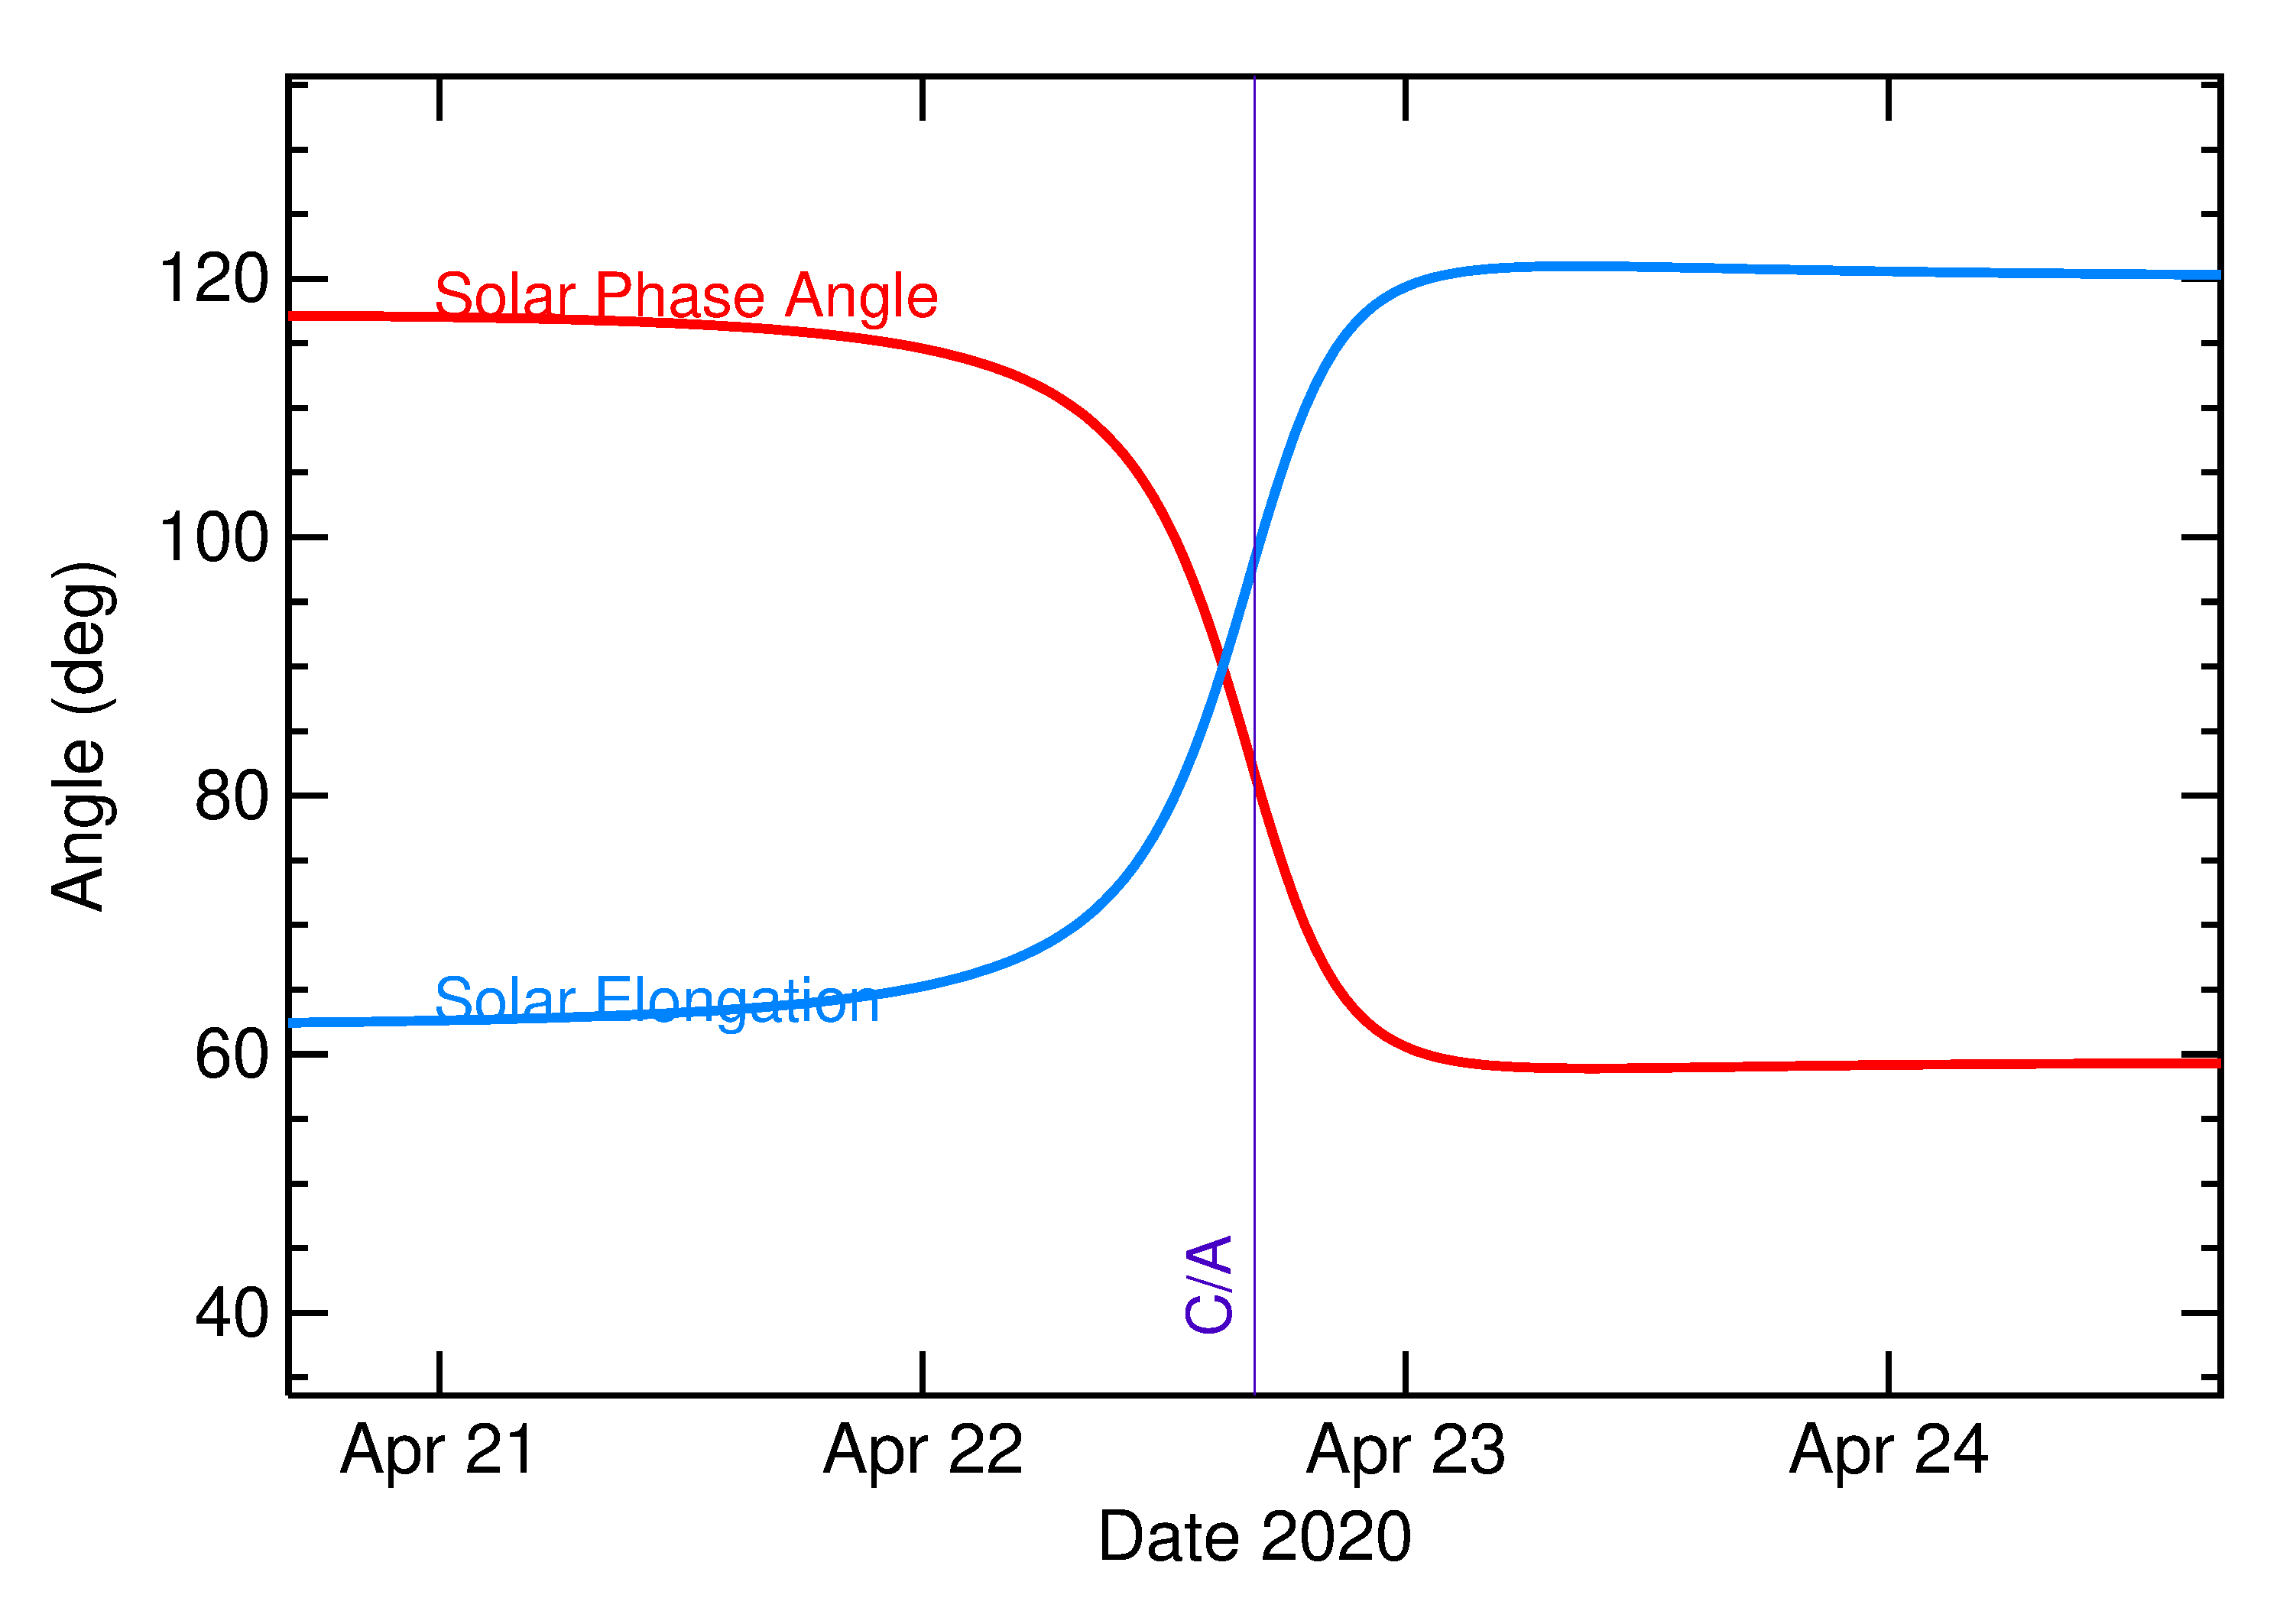 Solar Elongation and Solar Phase Angle of 2020 HF5 in the days around closest approach